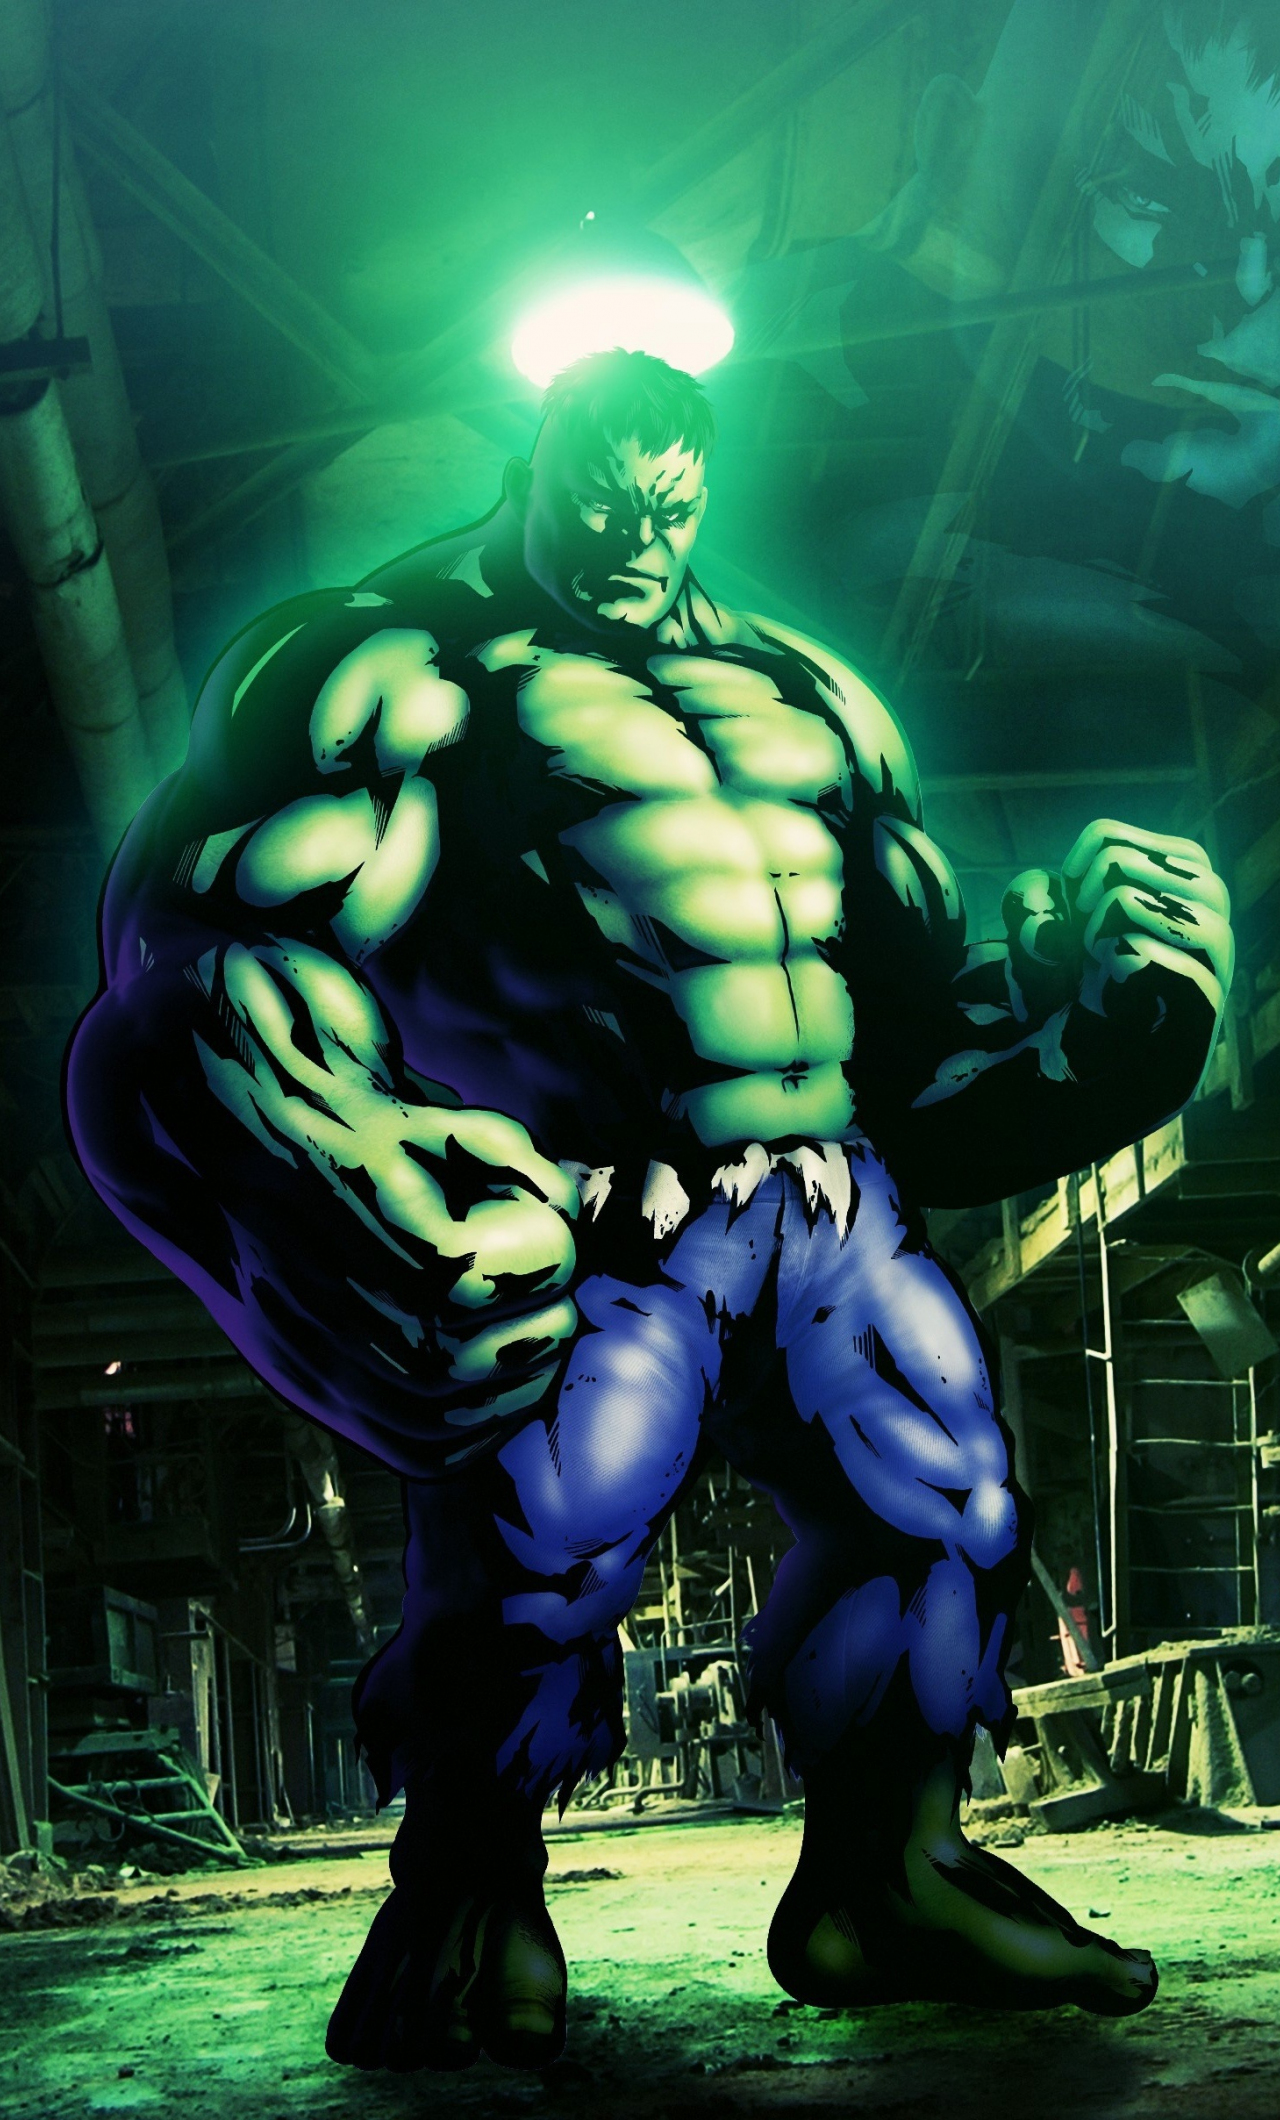 Download wallpaper 1280x2120 hulk, a muscle factory, artwork, iphone 6  plus, 1280x2120 hd background, 14872